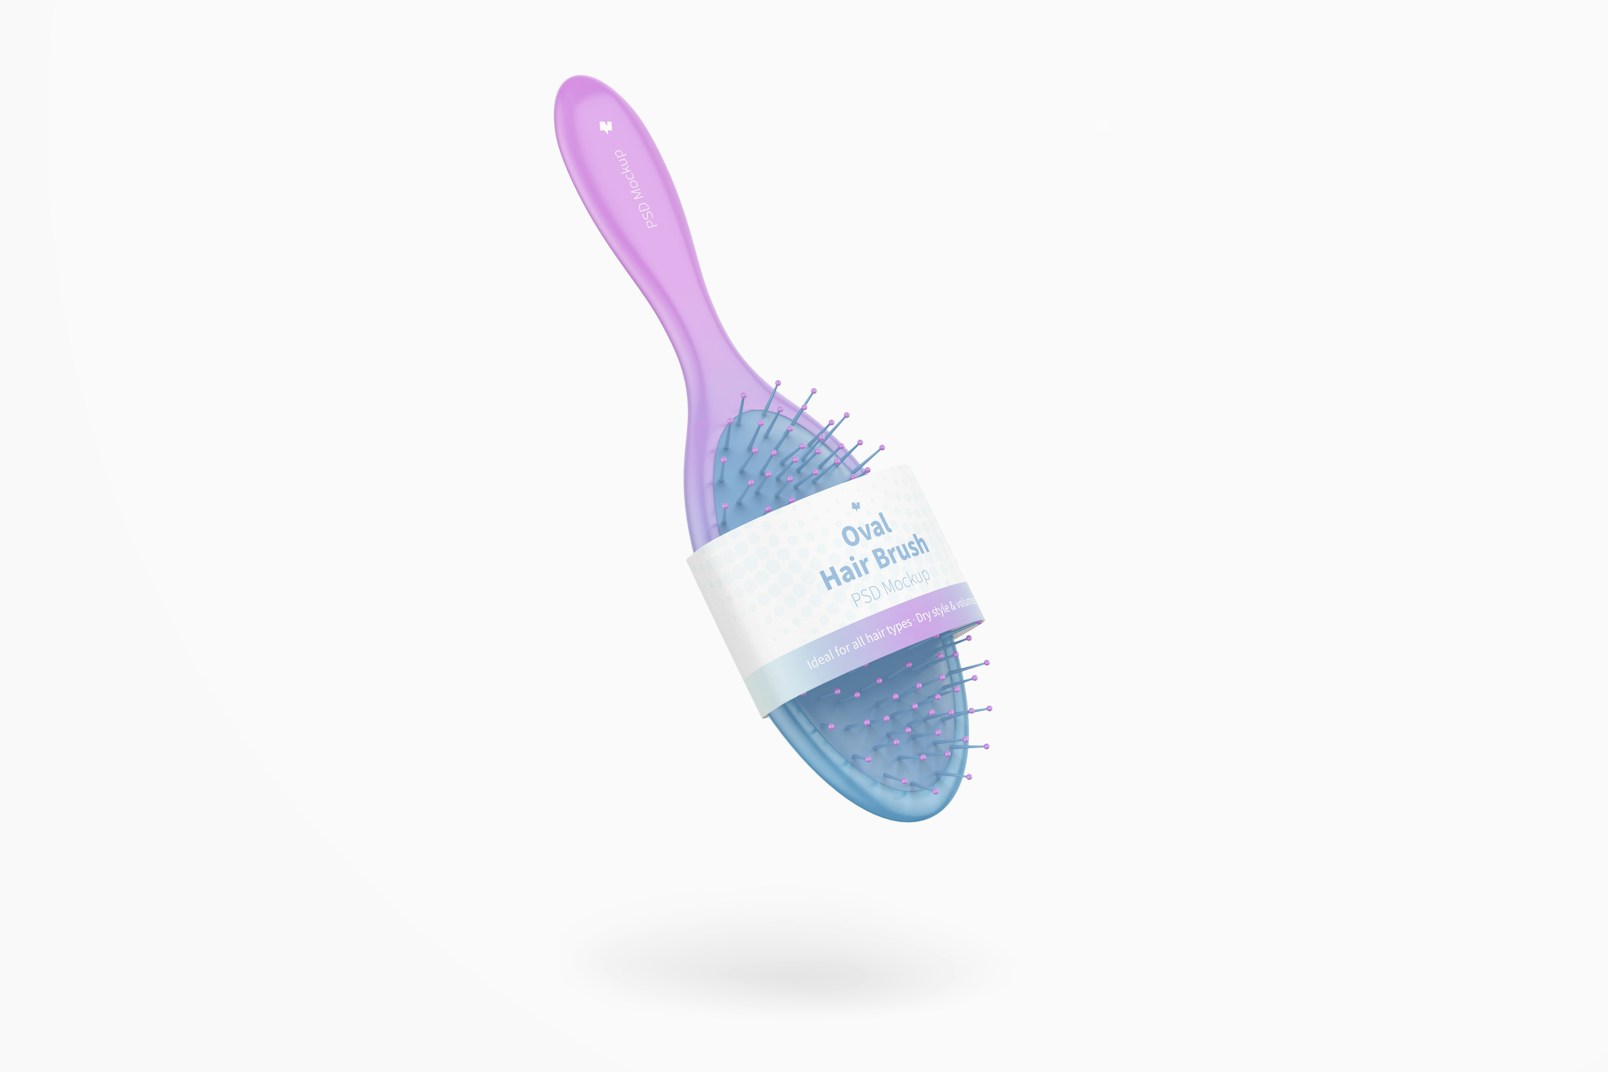 Oval Hair Brush with Label Mockup, Falling